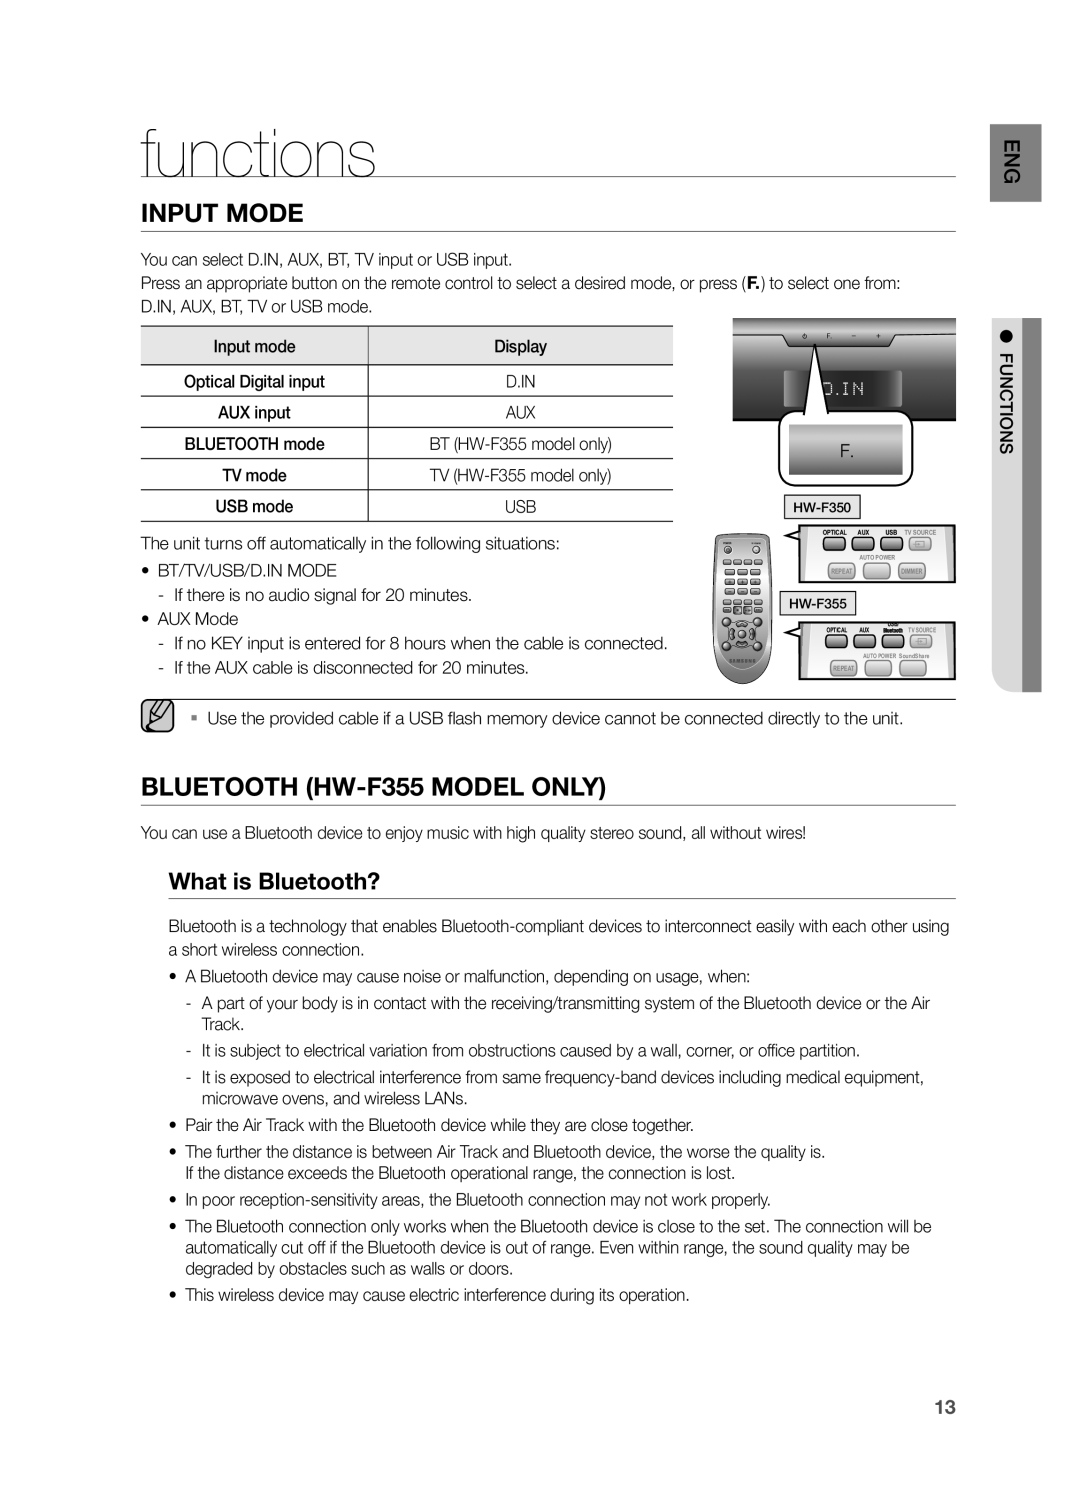 Samsung HWF355ZA user manual functions, input mode, BLUETOOTH HW-F355model only, What is Bluetooth? 